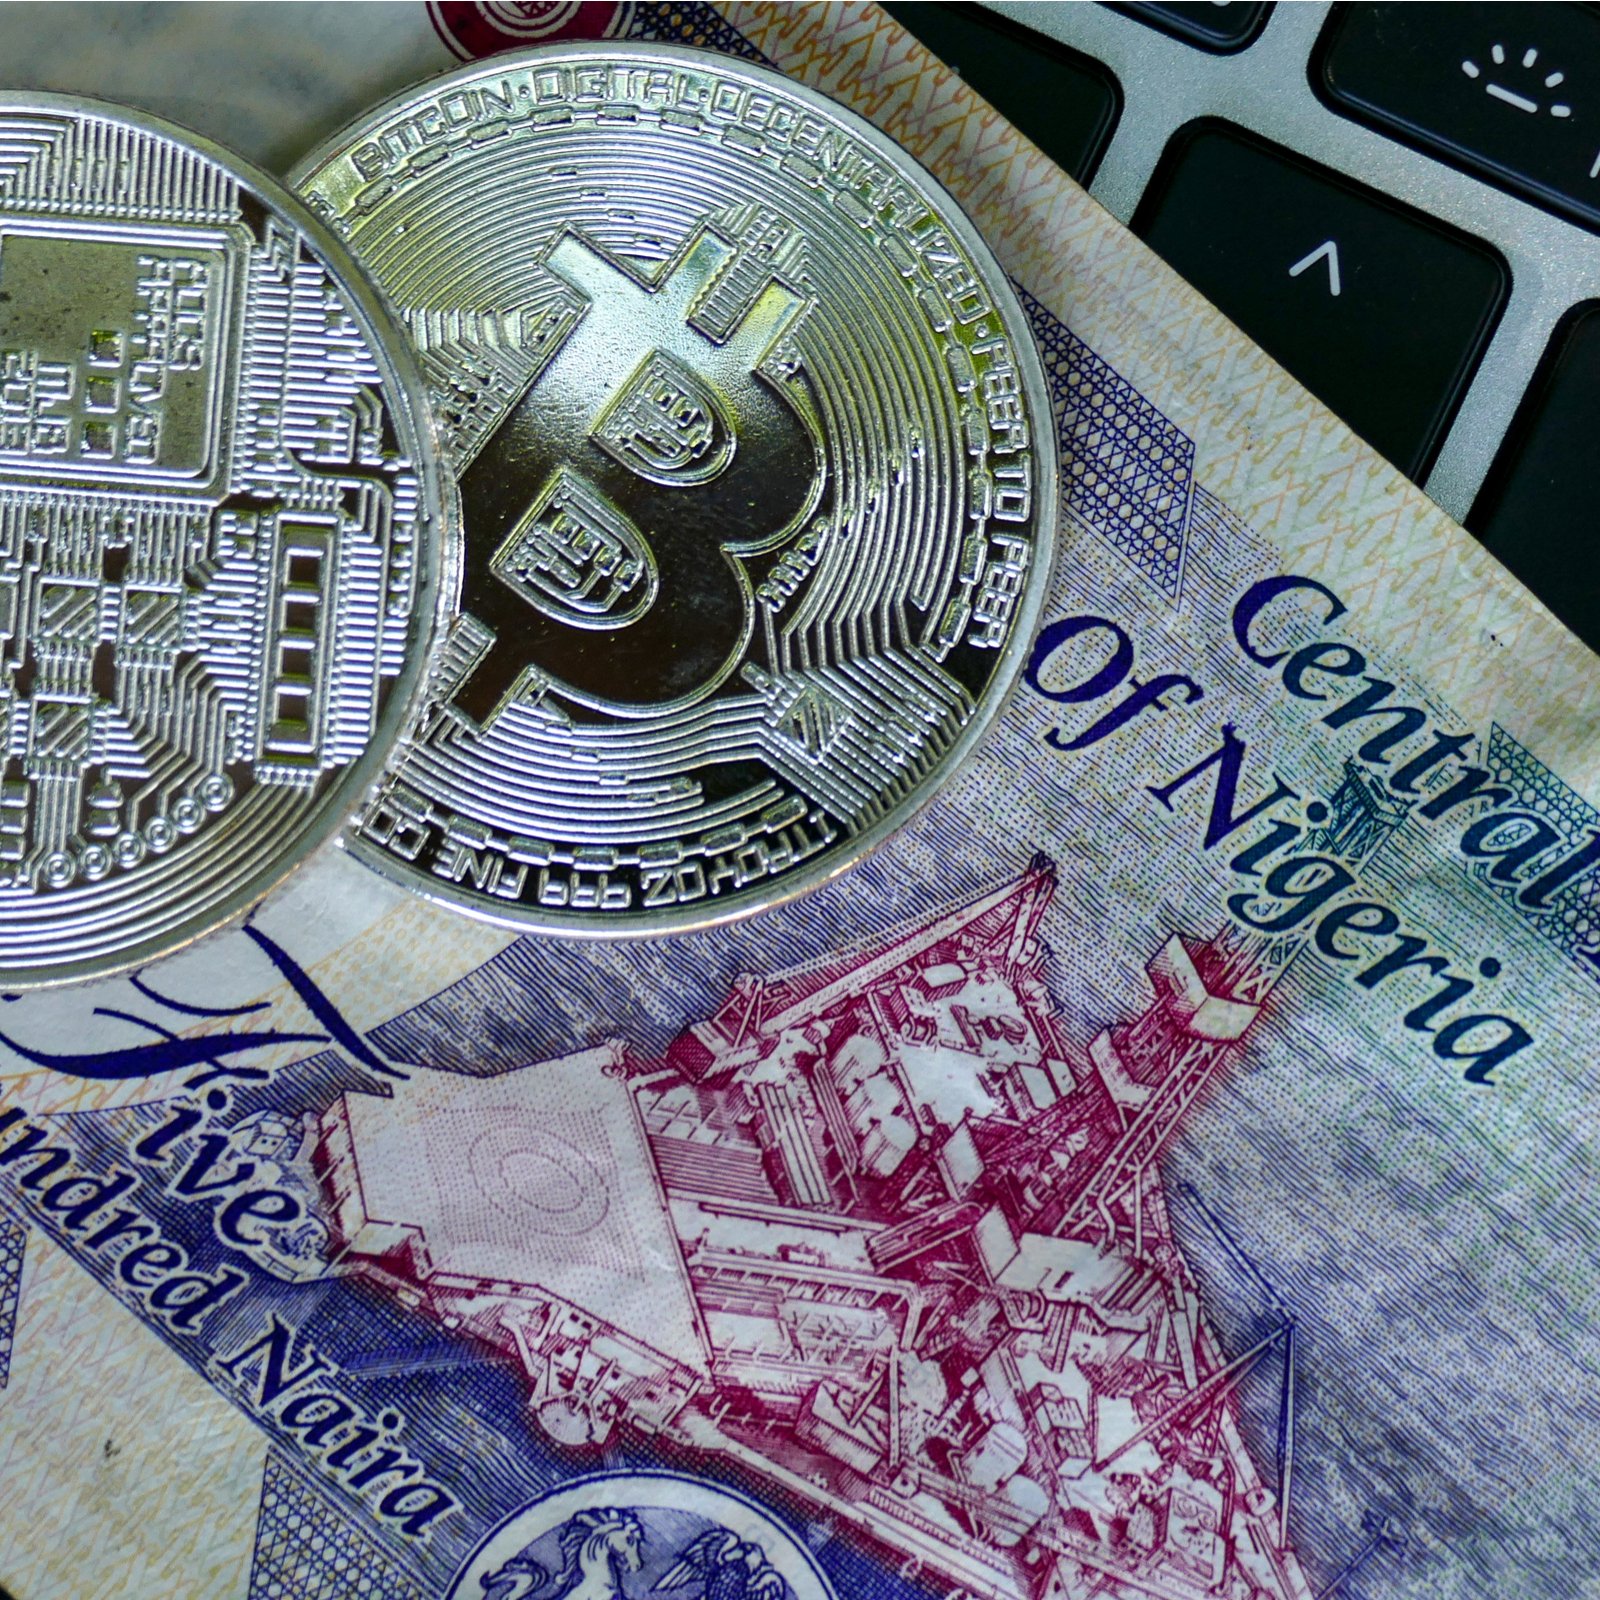 Nigerian Based P2P Bitcoin Exchange Offers Services to All African Nations